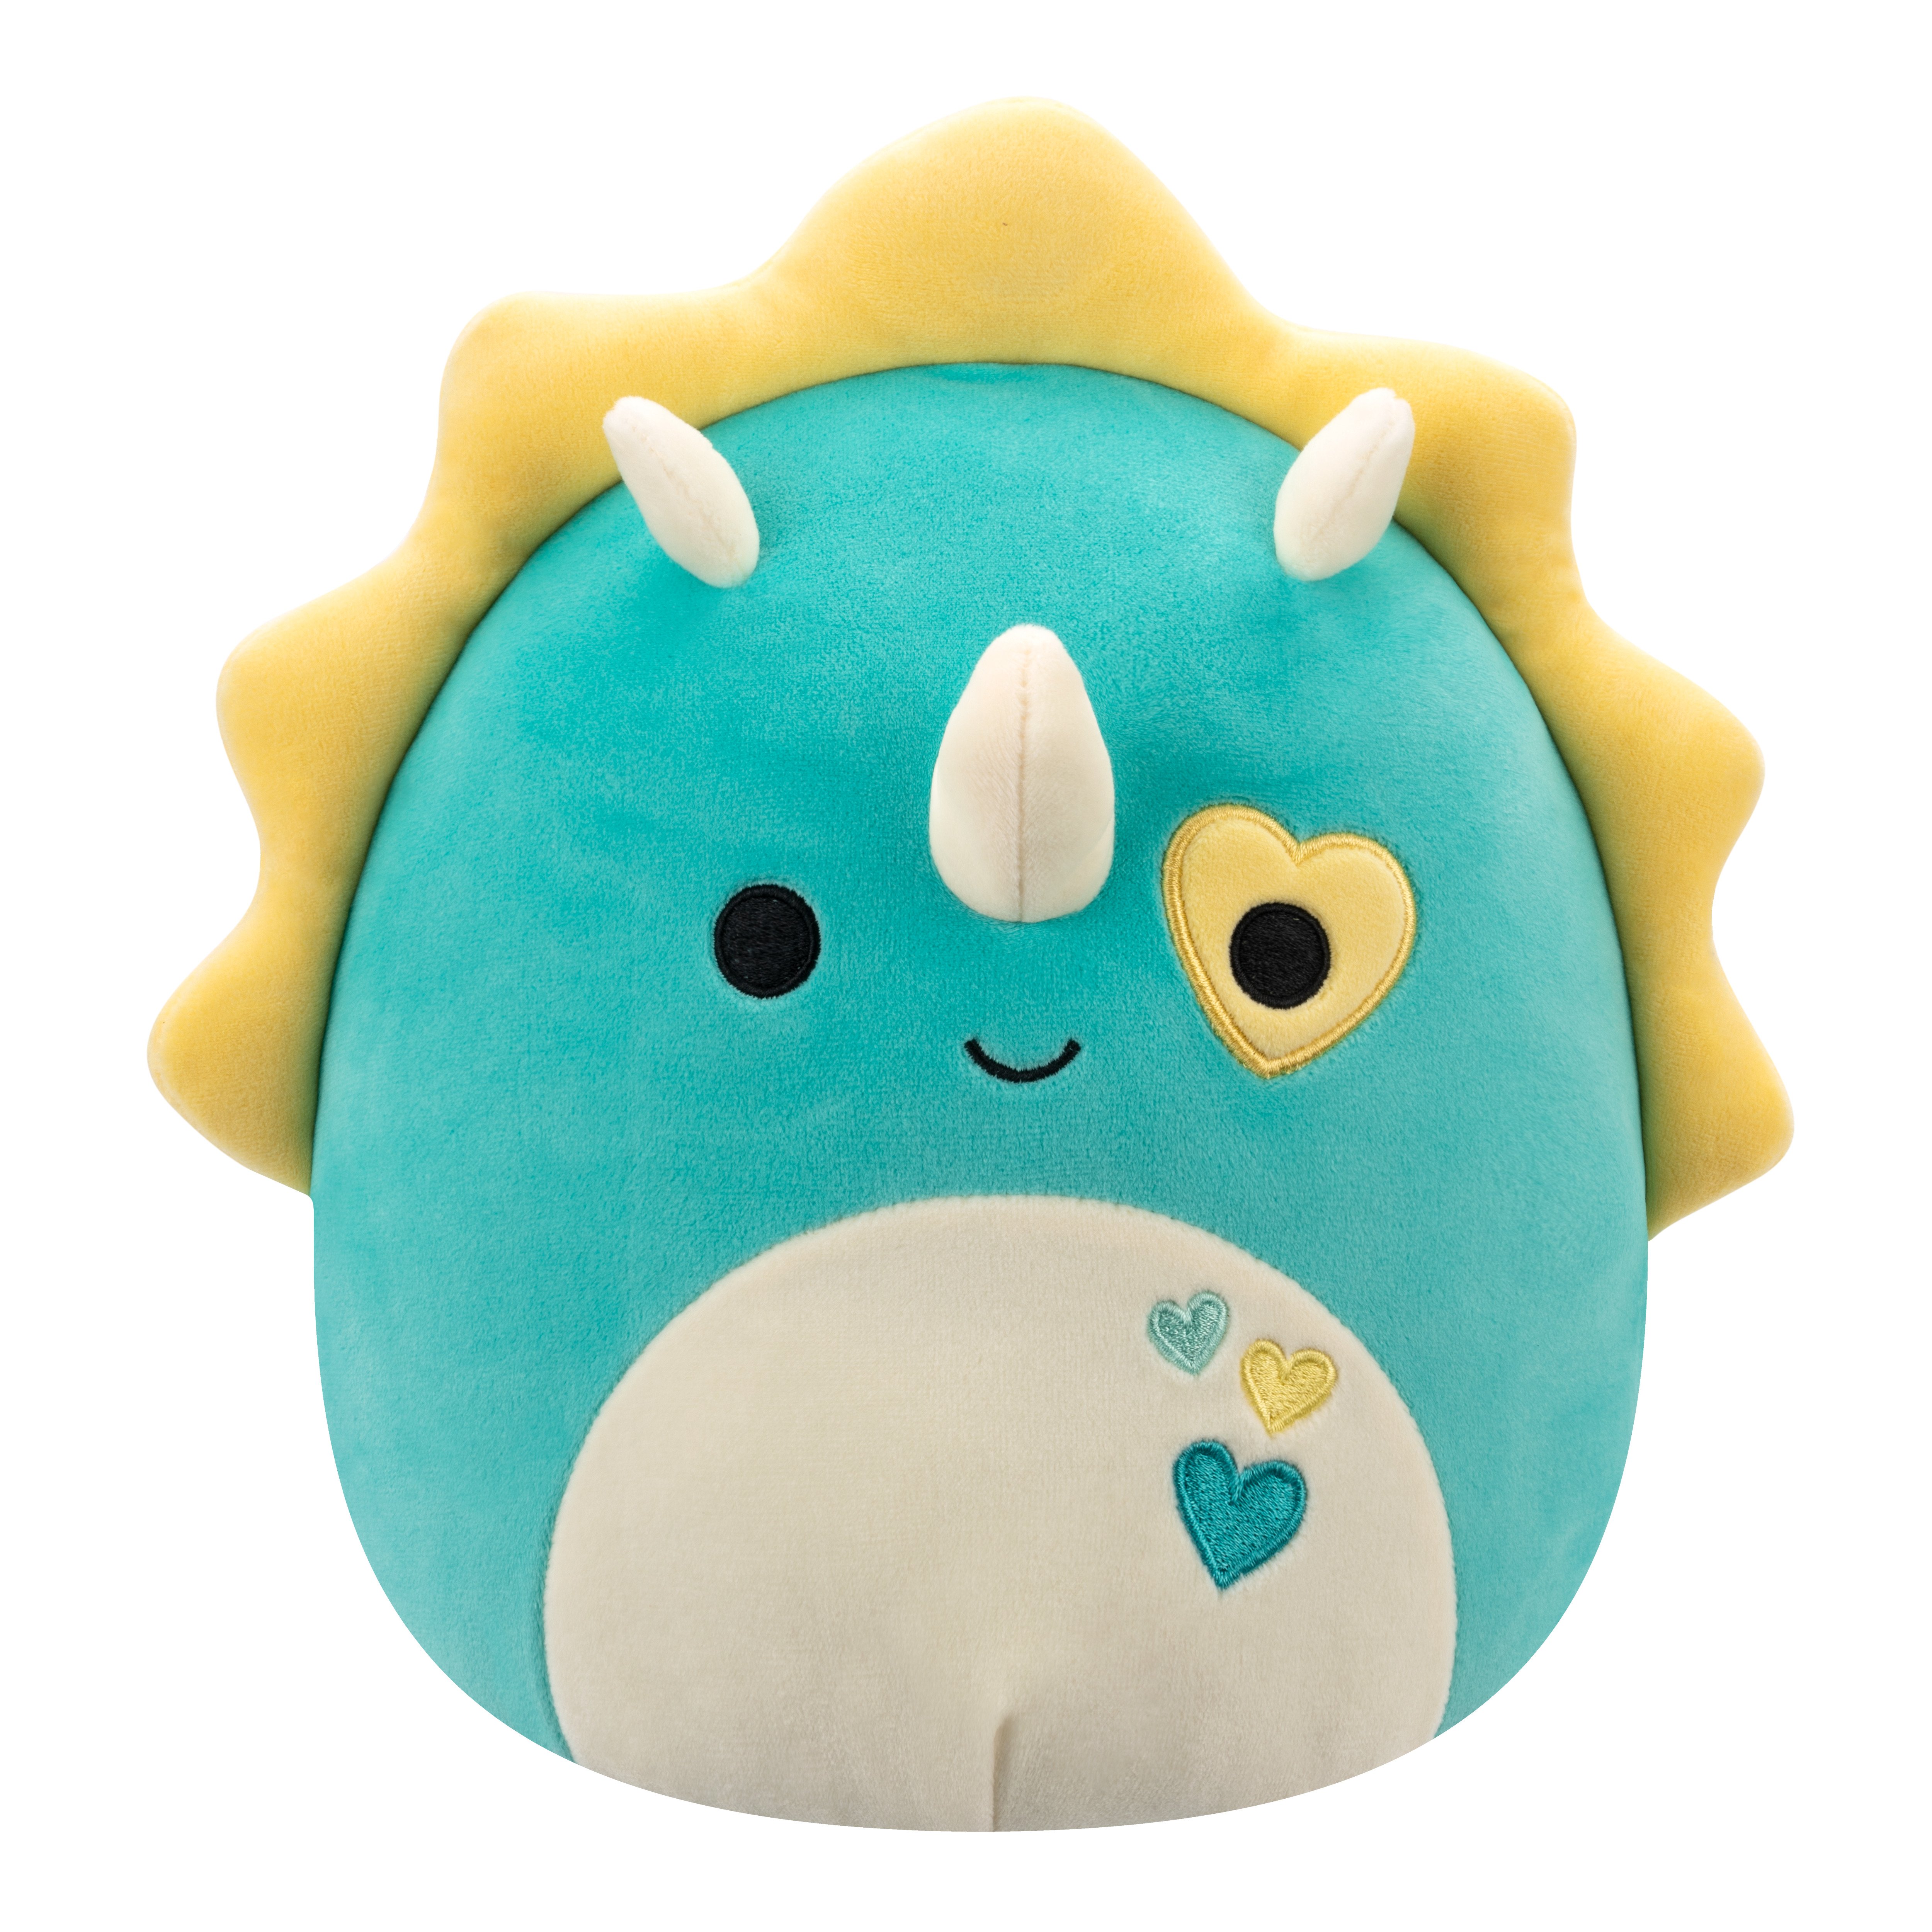 Squishmallows, Chienda the Wooly Mammoth